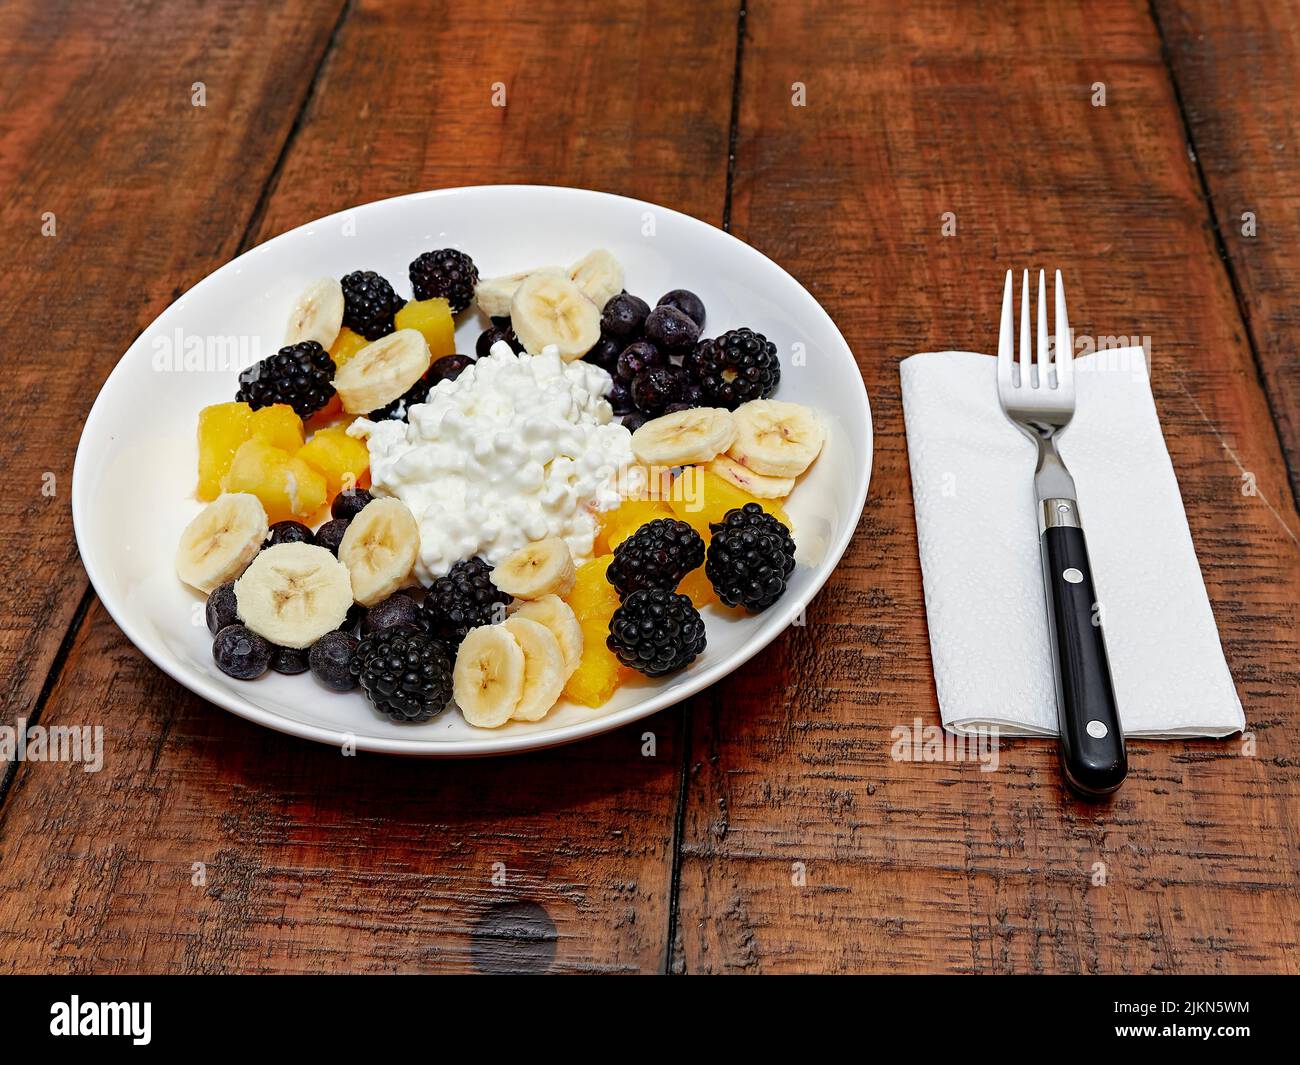 Healthy meal for breakfast or lunch bowl of cottage cheese and fruit consisting of banana slices, blueberries and blackberries, overhead view. Stock Photo